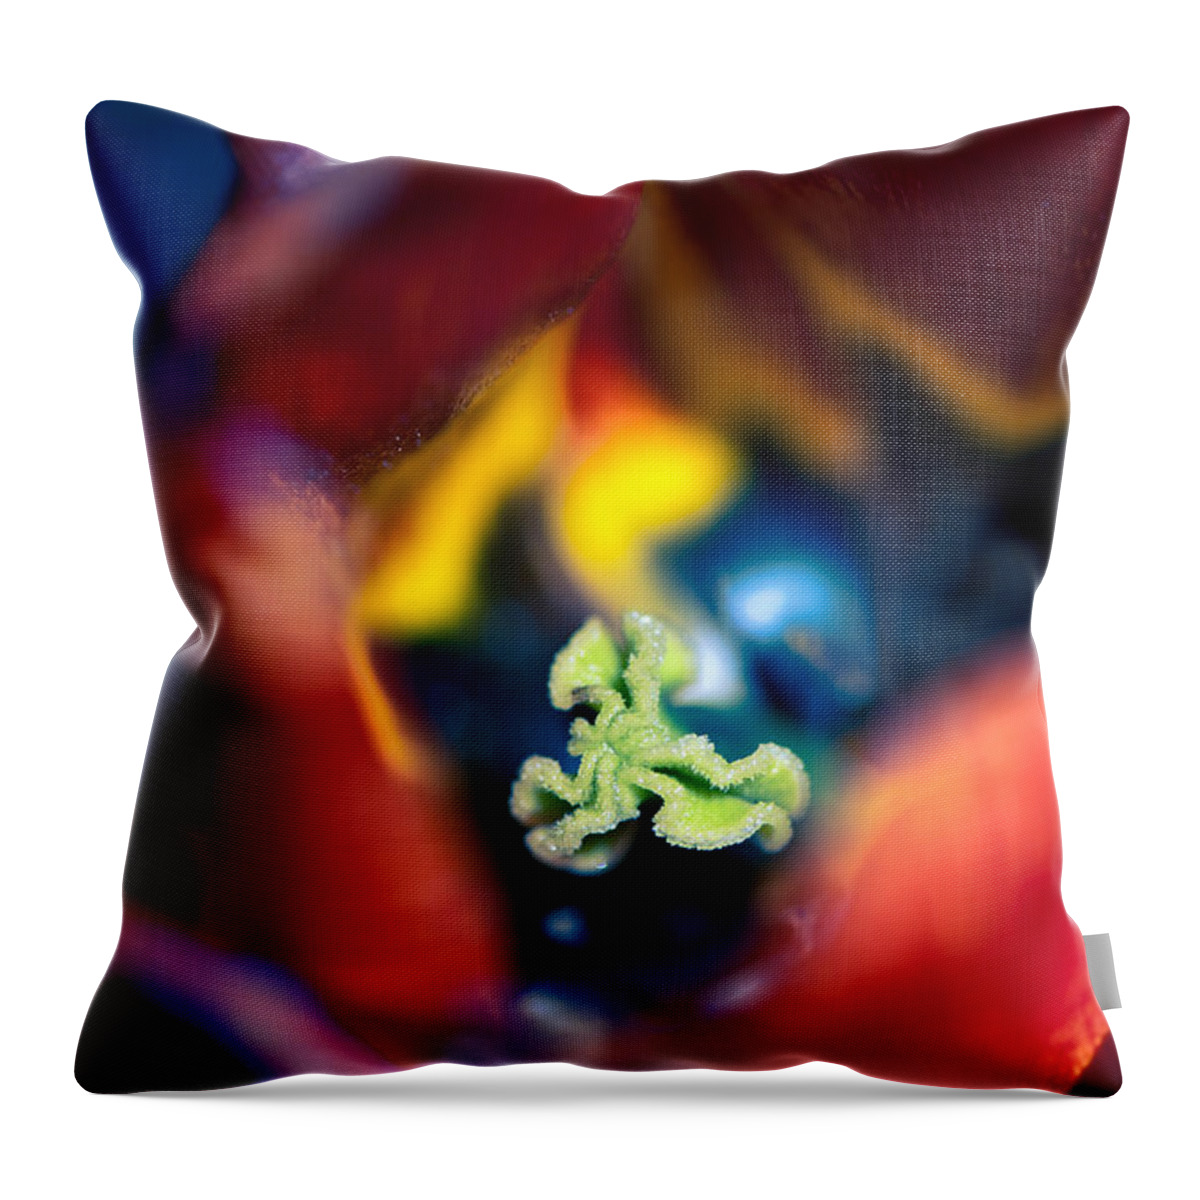 Beauty In Nature Throw Pillow featuring the photograph Luscious Kaleidoscope by Venetta Archer